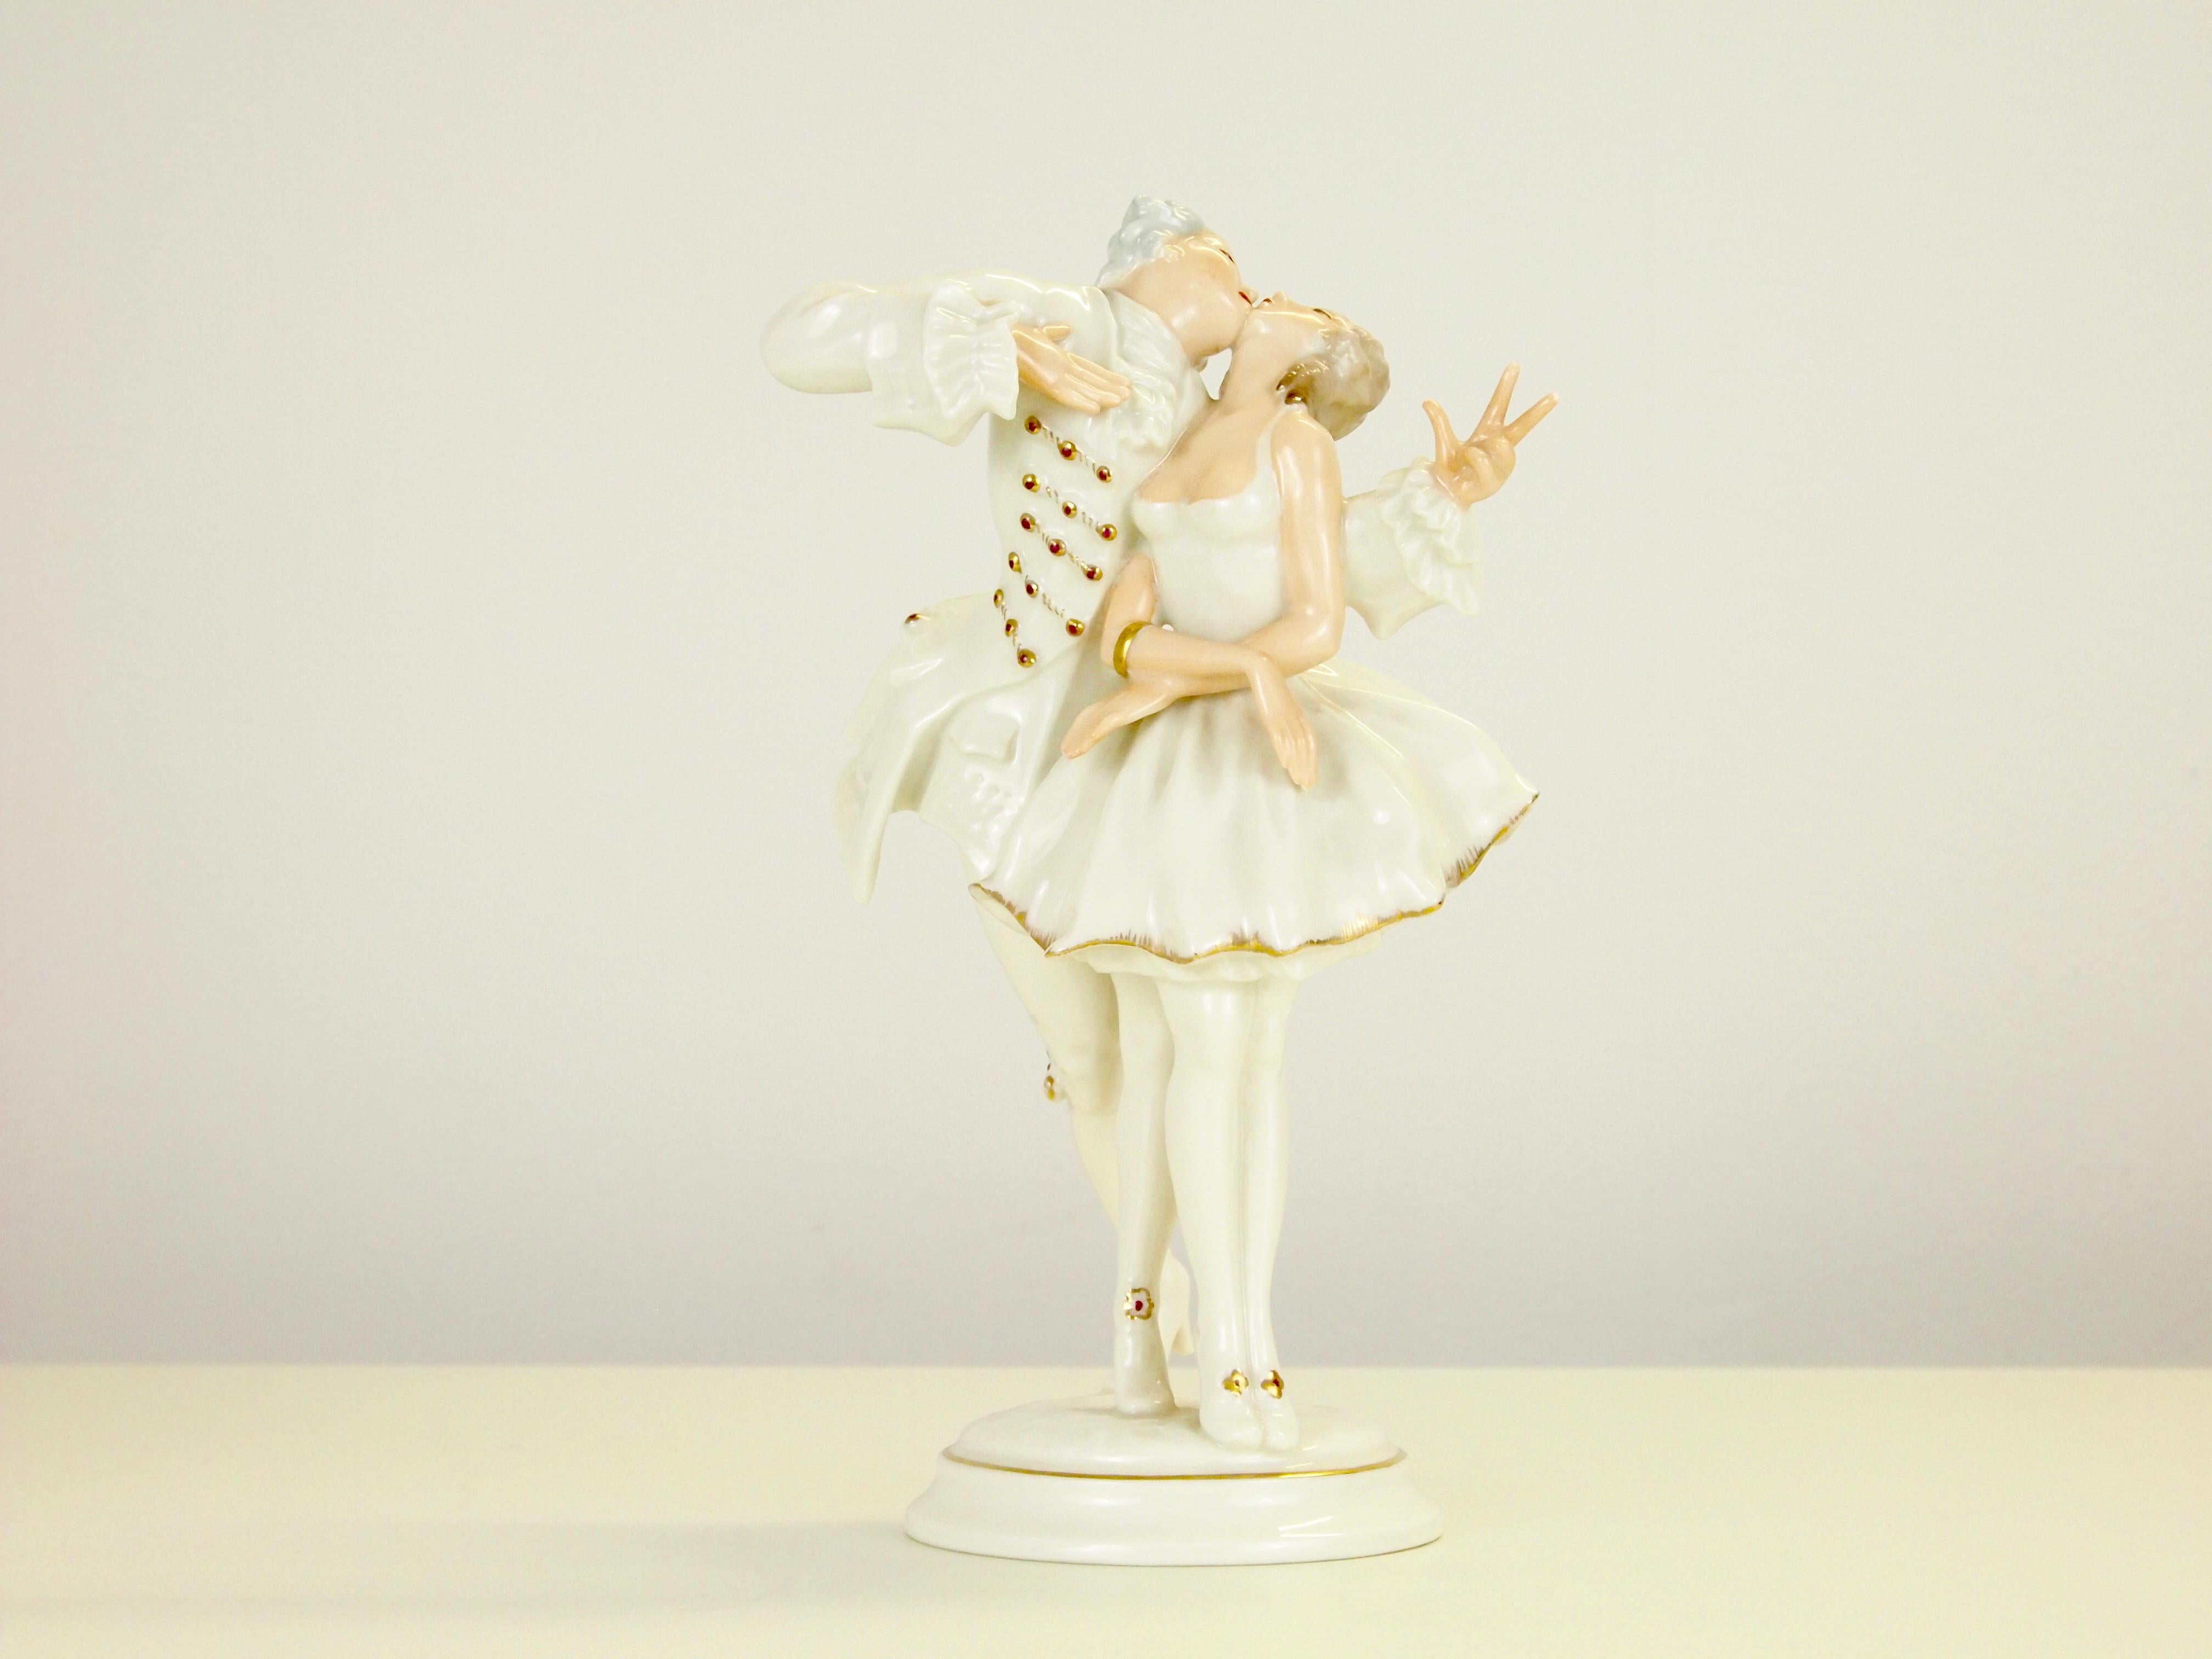 Vintage midcentury fine porcelain figurine depicting a romantic dancing couple in romantic dressing just starting to kiss.

The figurine is mostly white glazed with golden accents and has hand painted body parts. It dates from the period 1955-1969